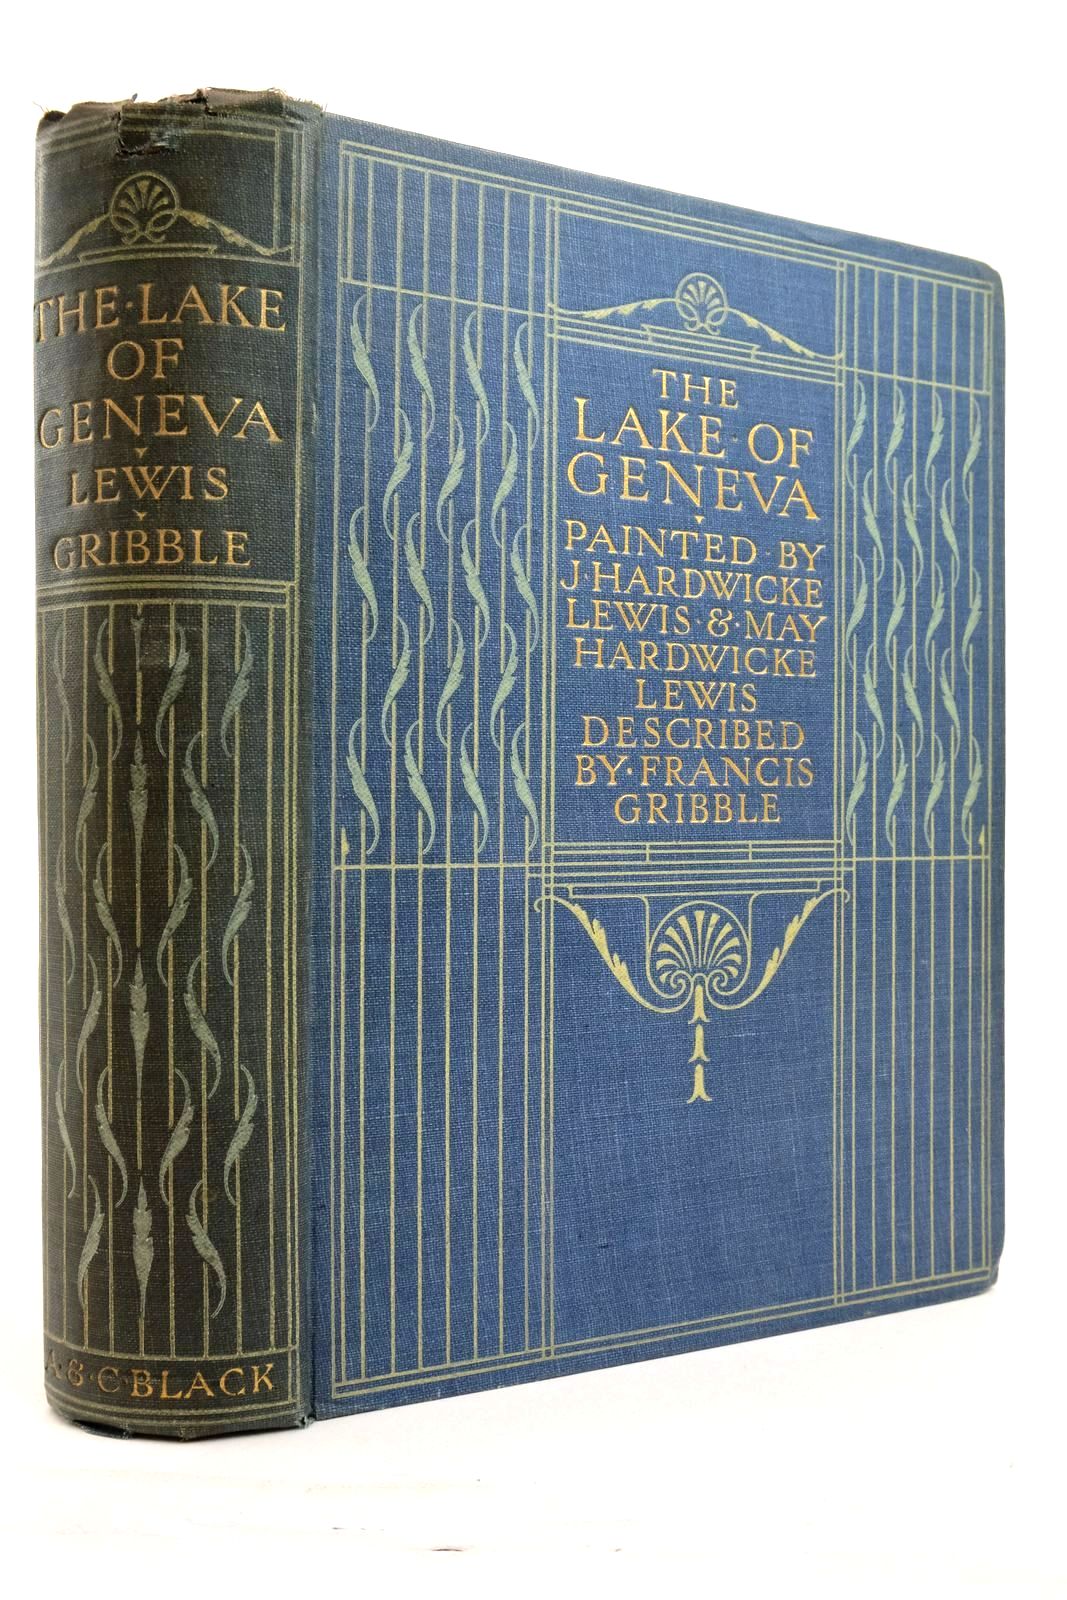 Photo of THE LAKE OF GENEVA written by Gribble, Francis illustrated by Lewis, J. Hardwicke Lewis, May Hardwicke published by Adam &amp; Charles Black (STOCK CODE: 2137434)  for sale by Stella & Rose's Books